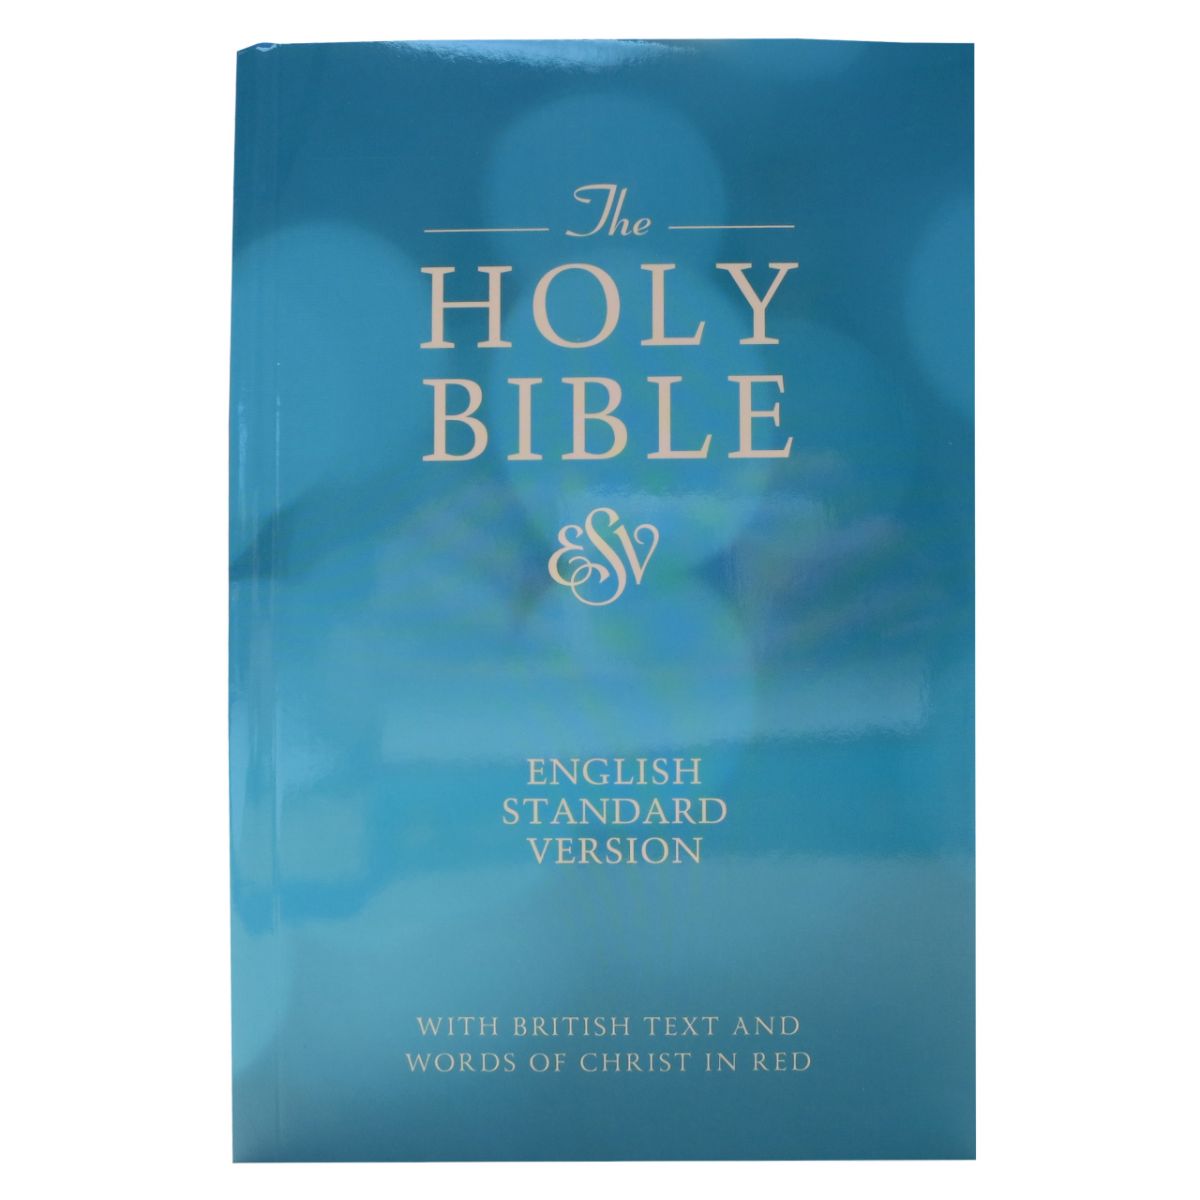 Bible Society Bibles and Books Including all Dyslexia-Friendly books of the Bible